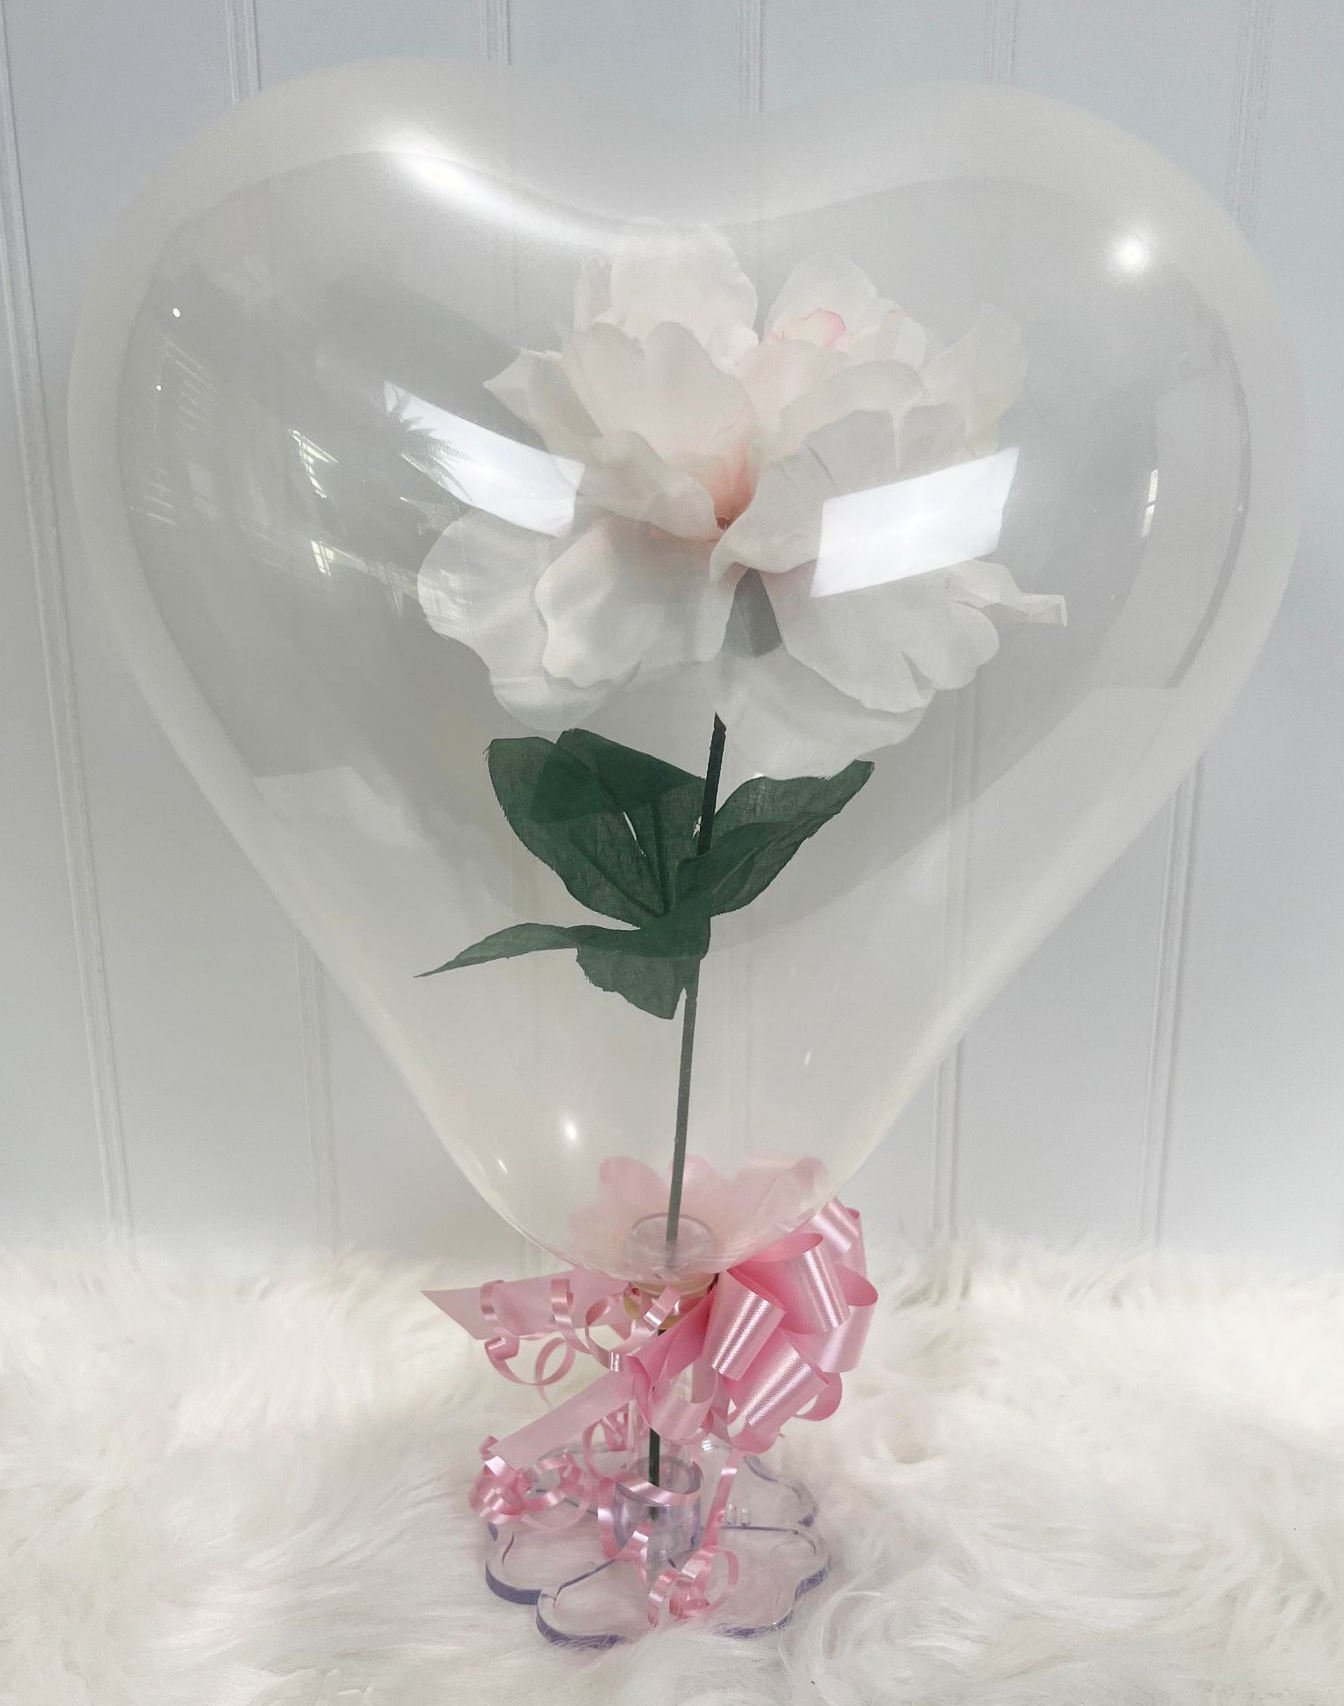 flowers in a balloon gift